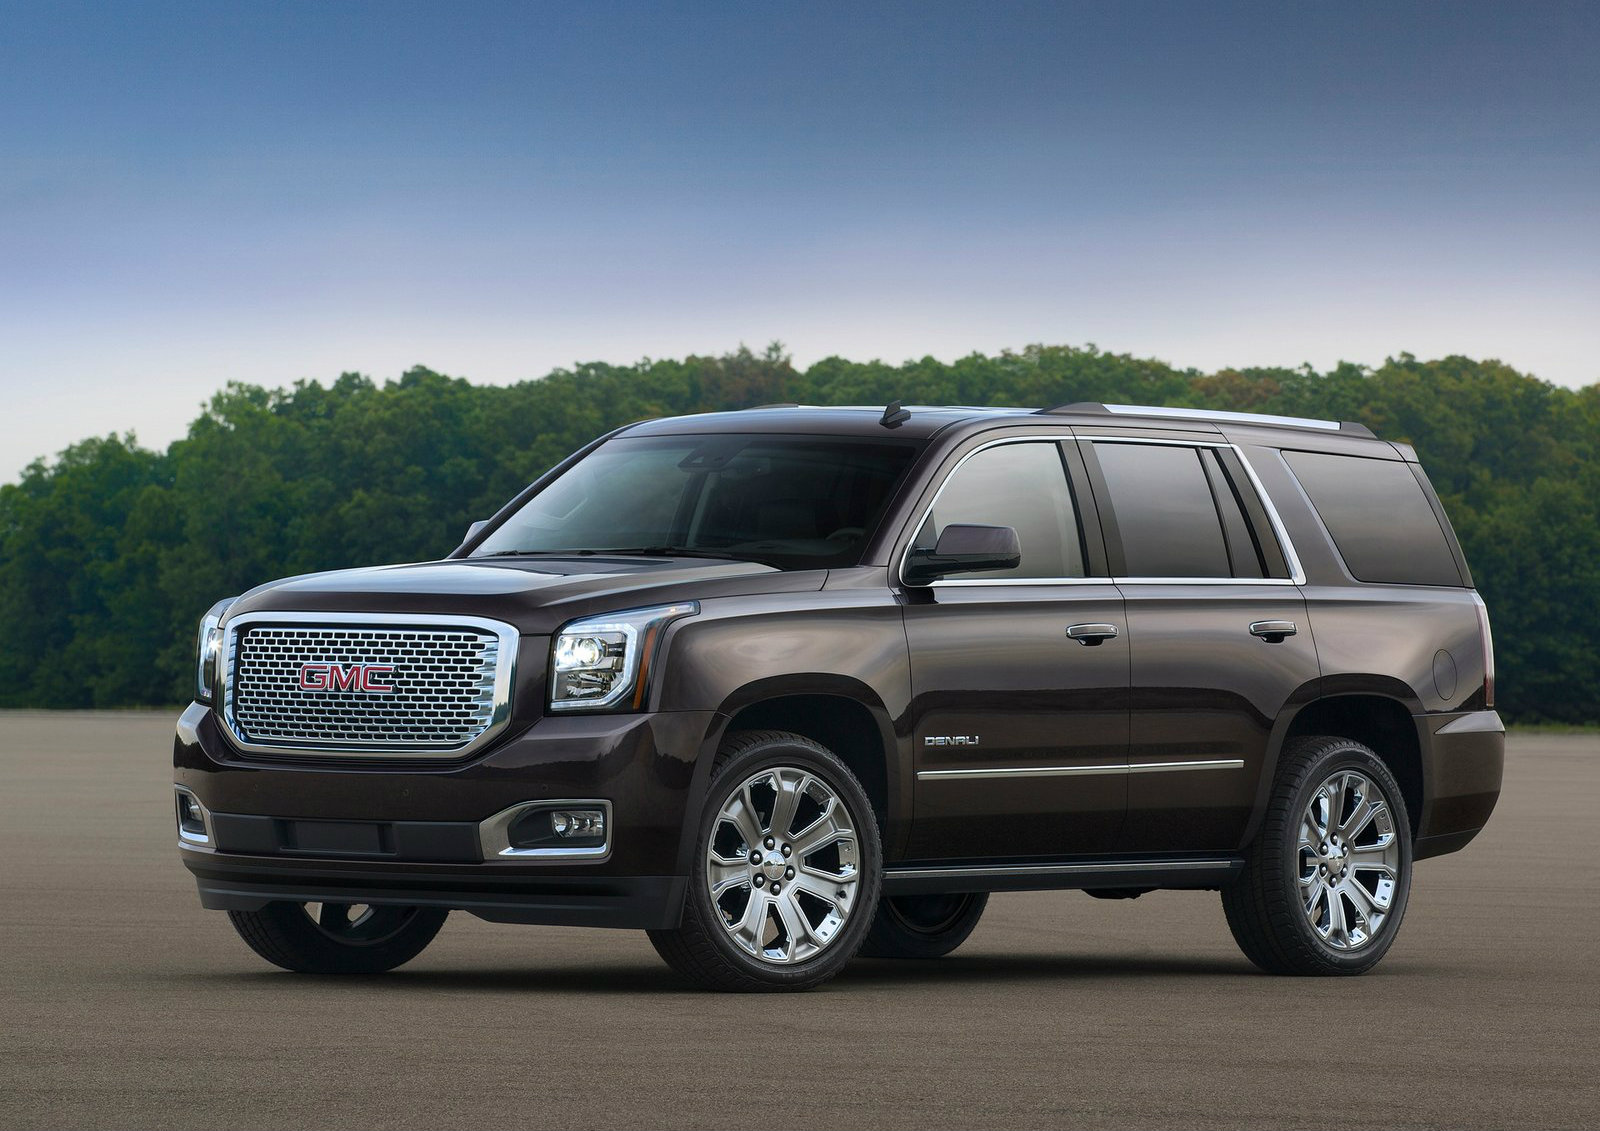 Gm Full Size Suvs Updated For The 2015i Model Year Autoevolution